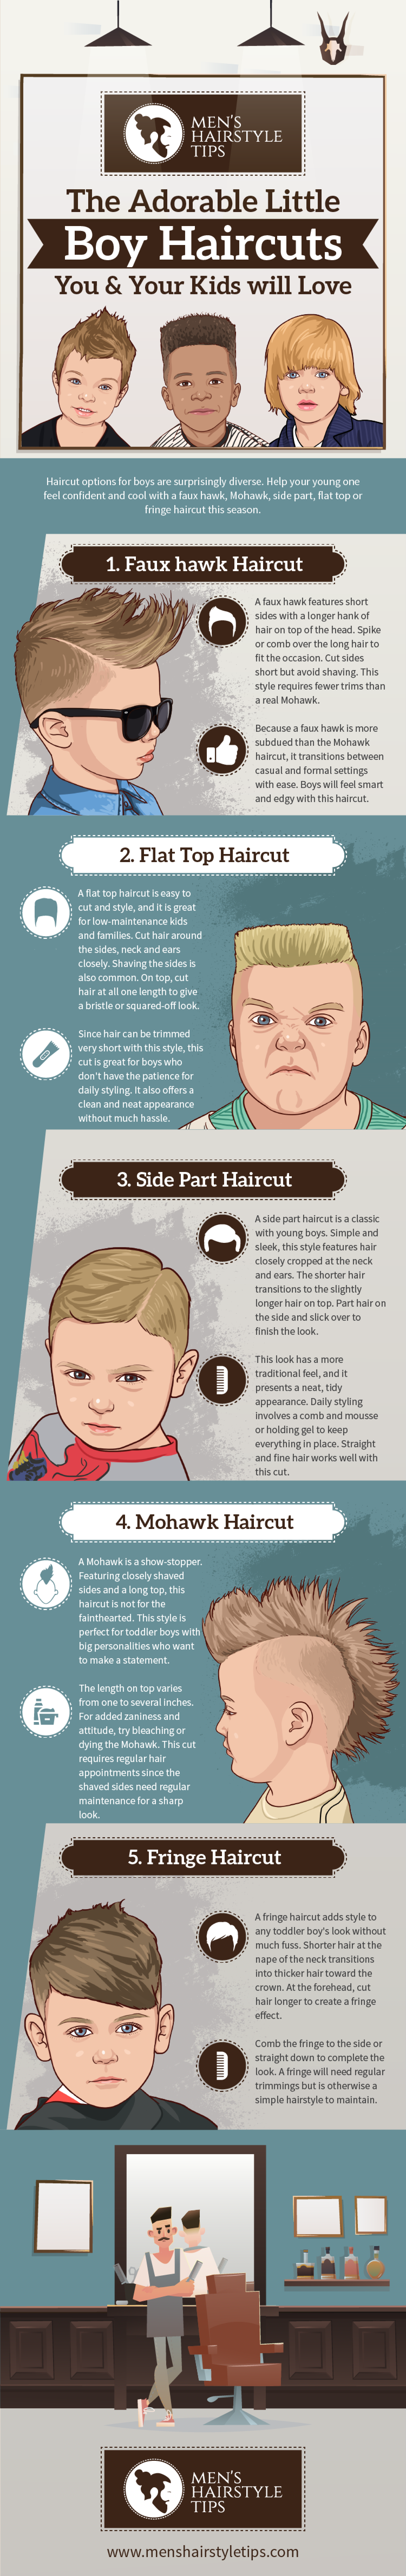 Adorable Little Boy Haircuts You & Your Kids Will Love Infographic